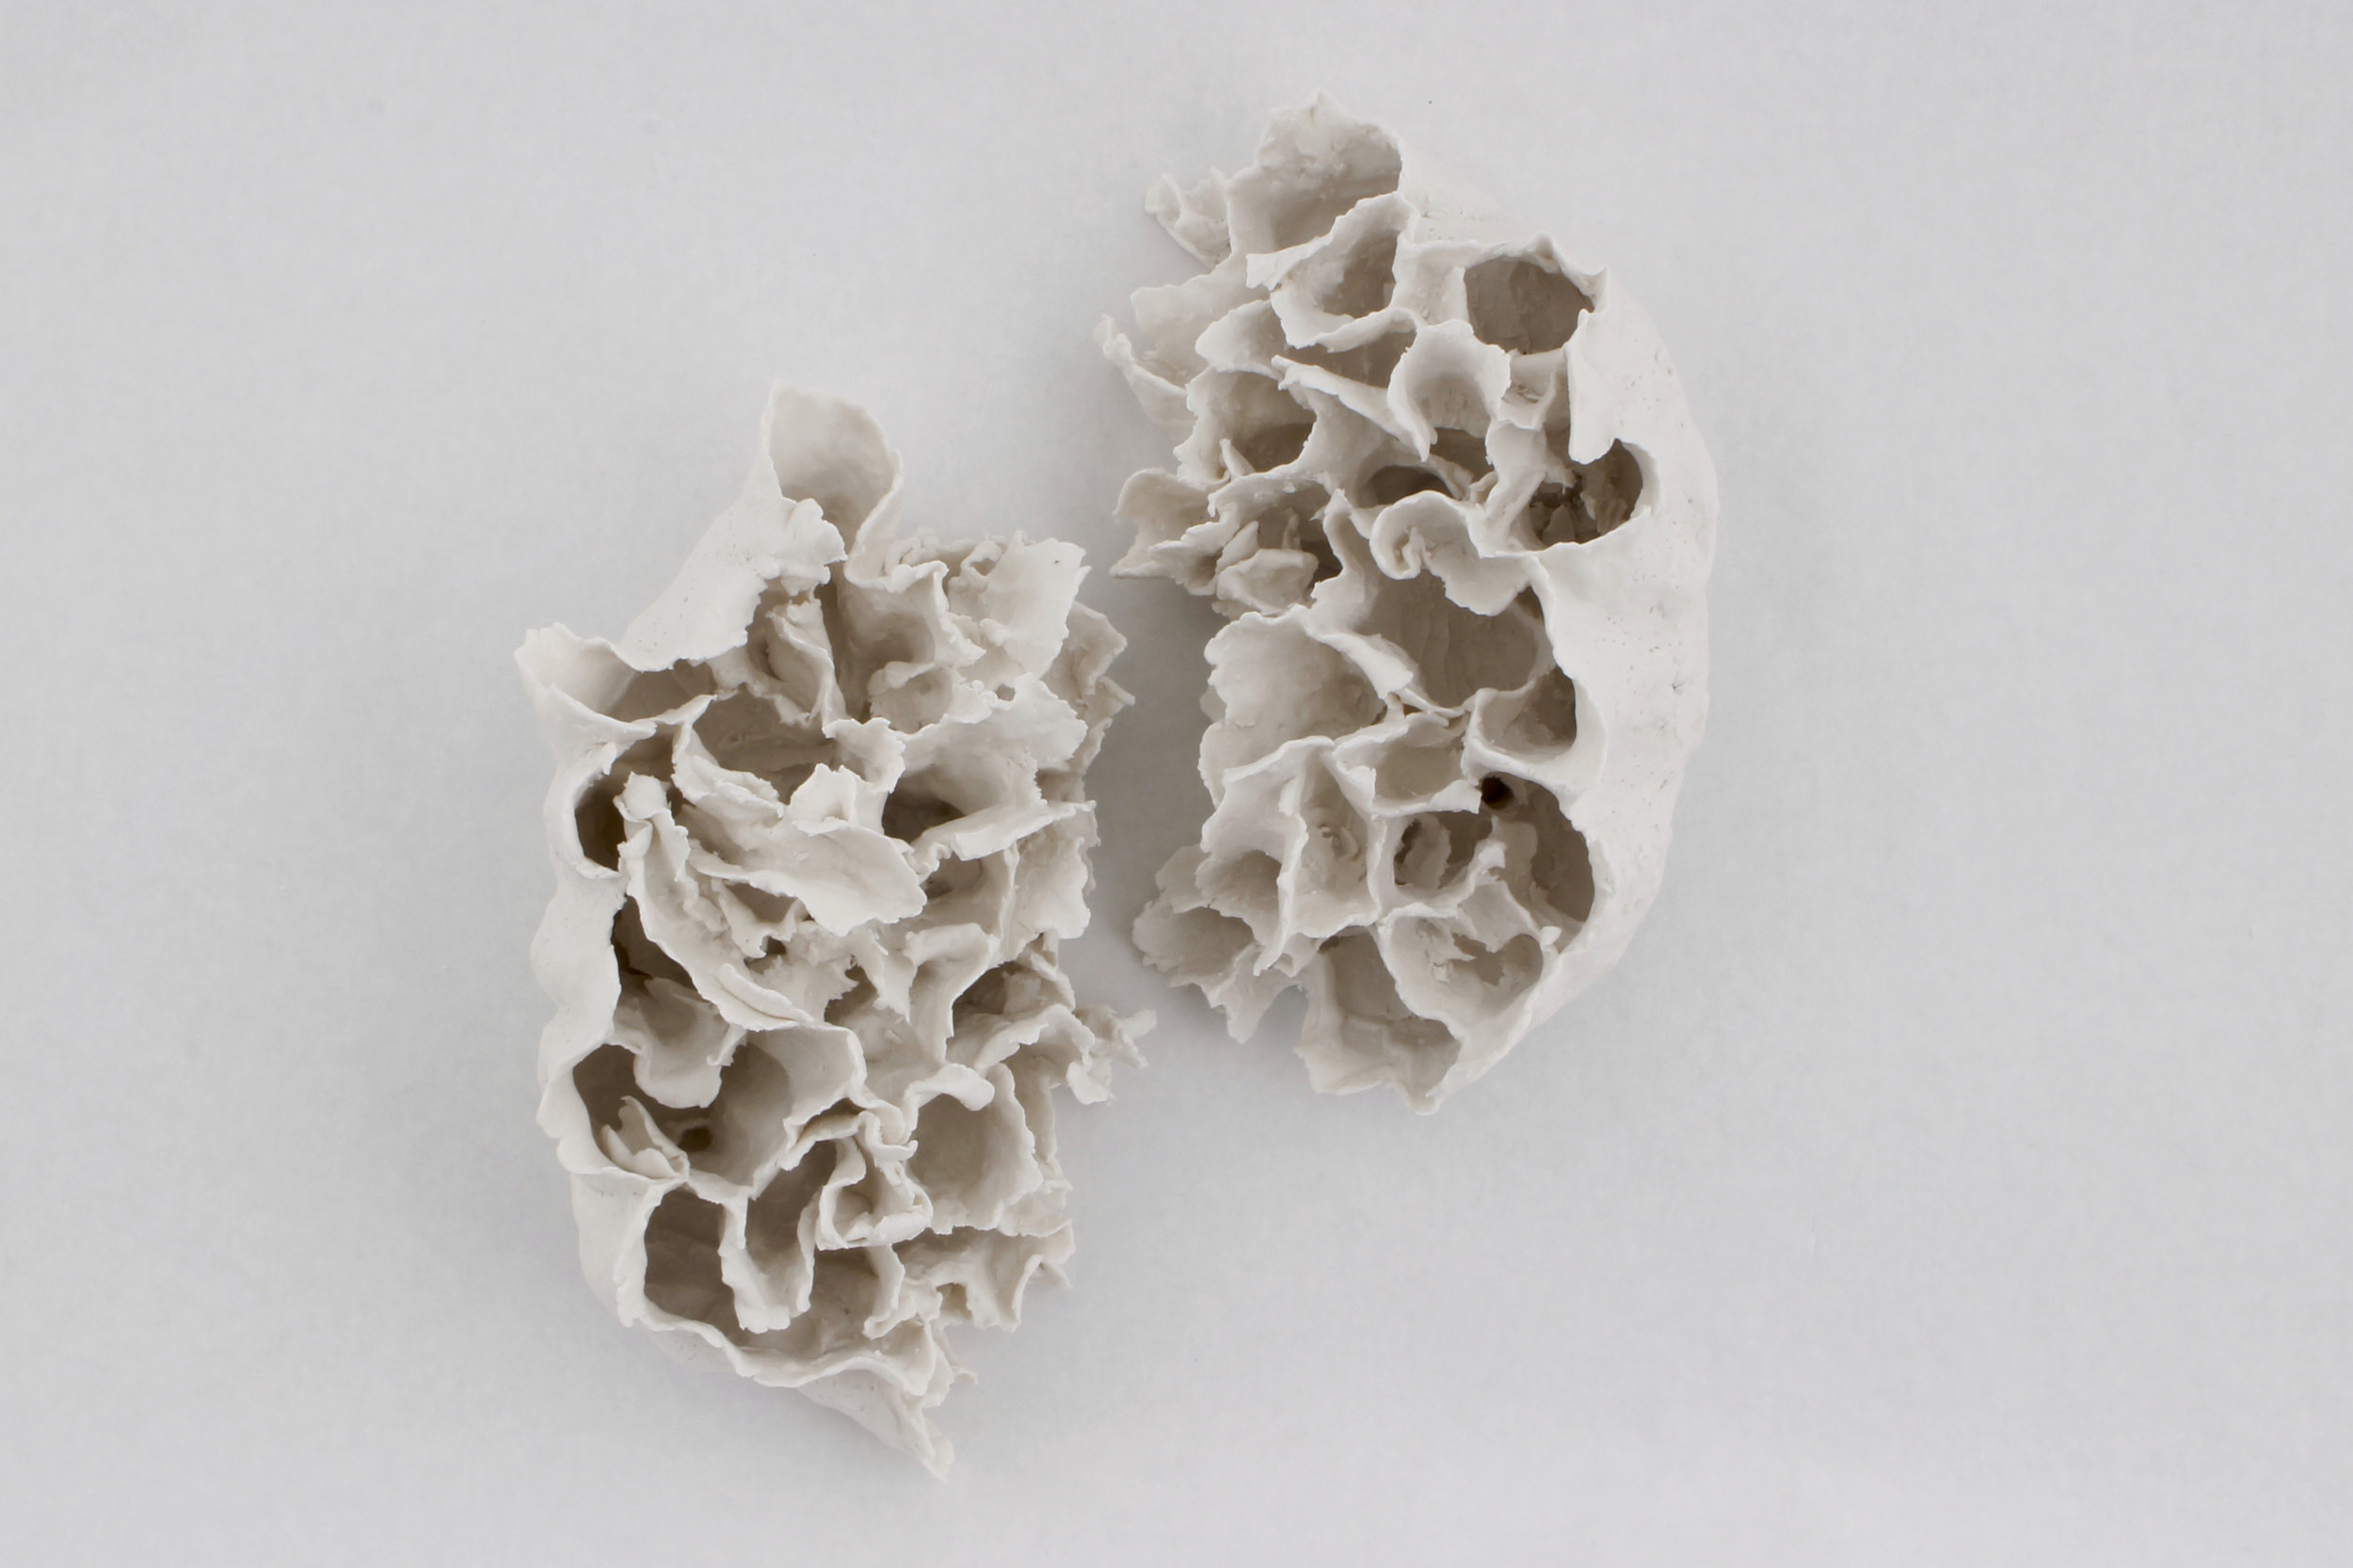  Renqian Yang , Clustered Light , 2018. Paper clay, fire to cone 6, electric kiln, 11 x 7 x 5 inches each © Renqian Yang, courtesy Fou Gallery   